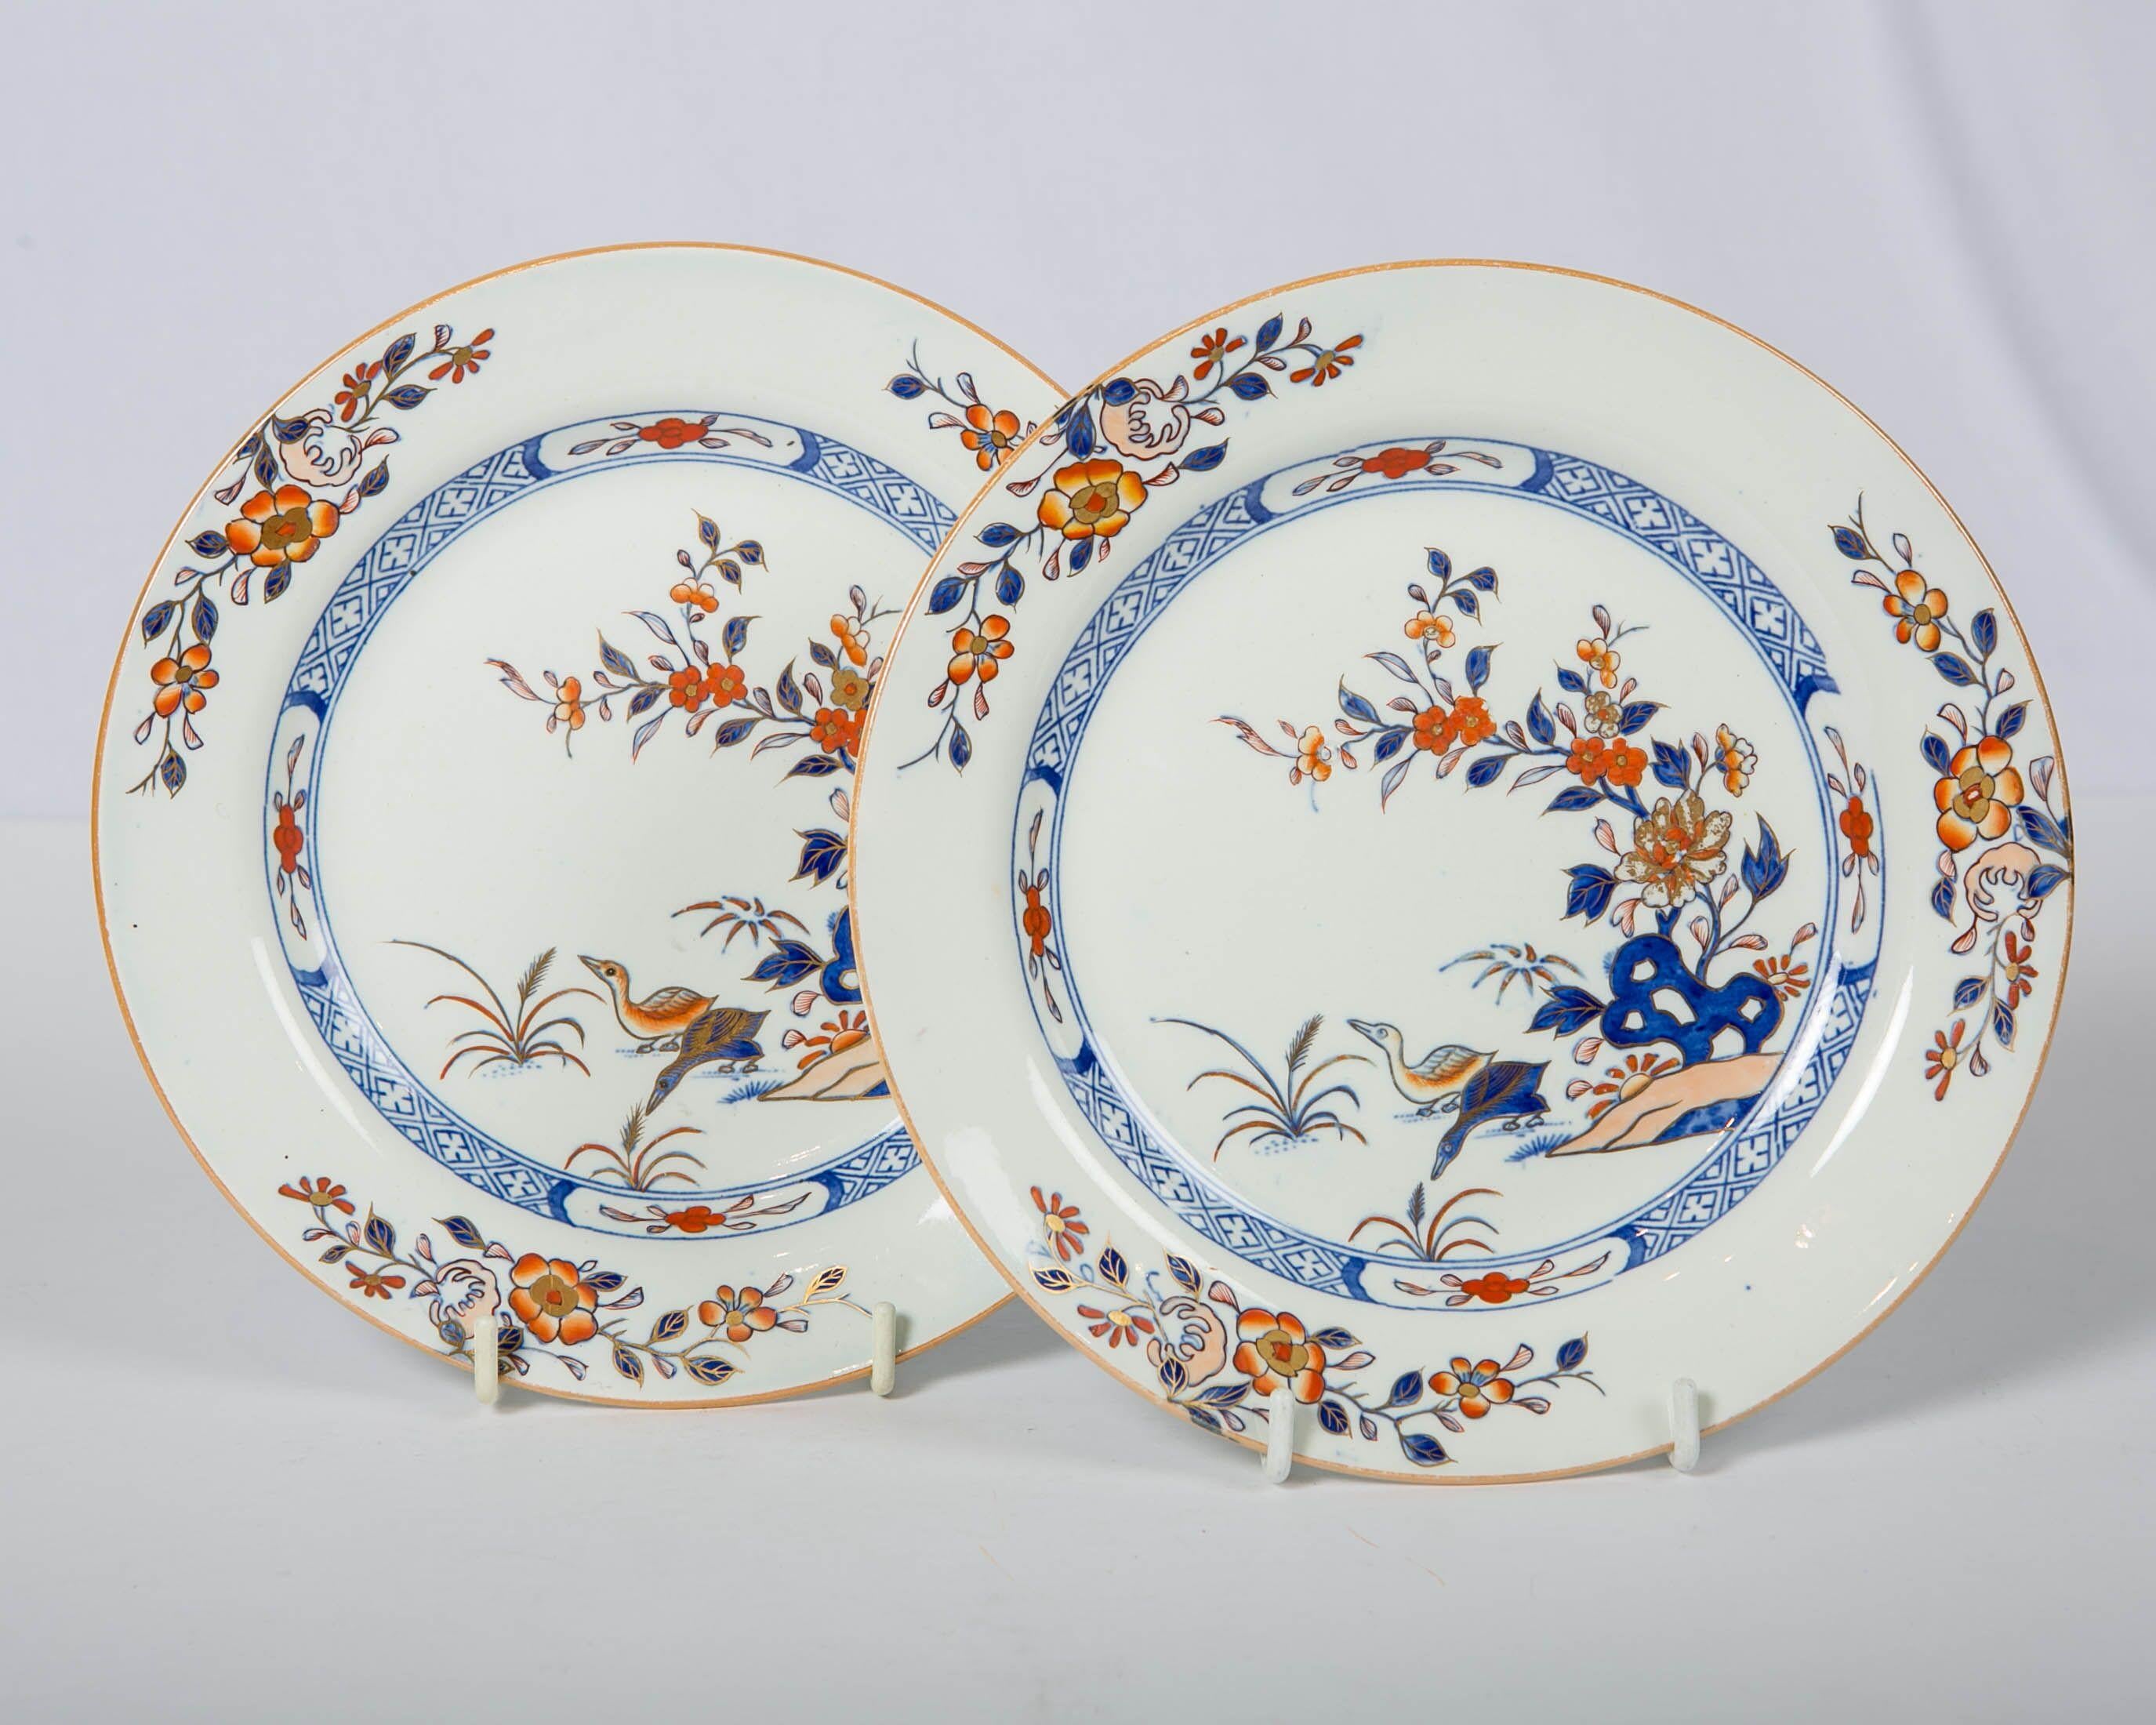 Set of Four Wedgwood Dessert Dishes Showing a Pair of Ducks Made England c-1820 1